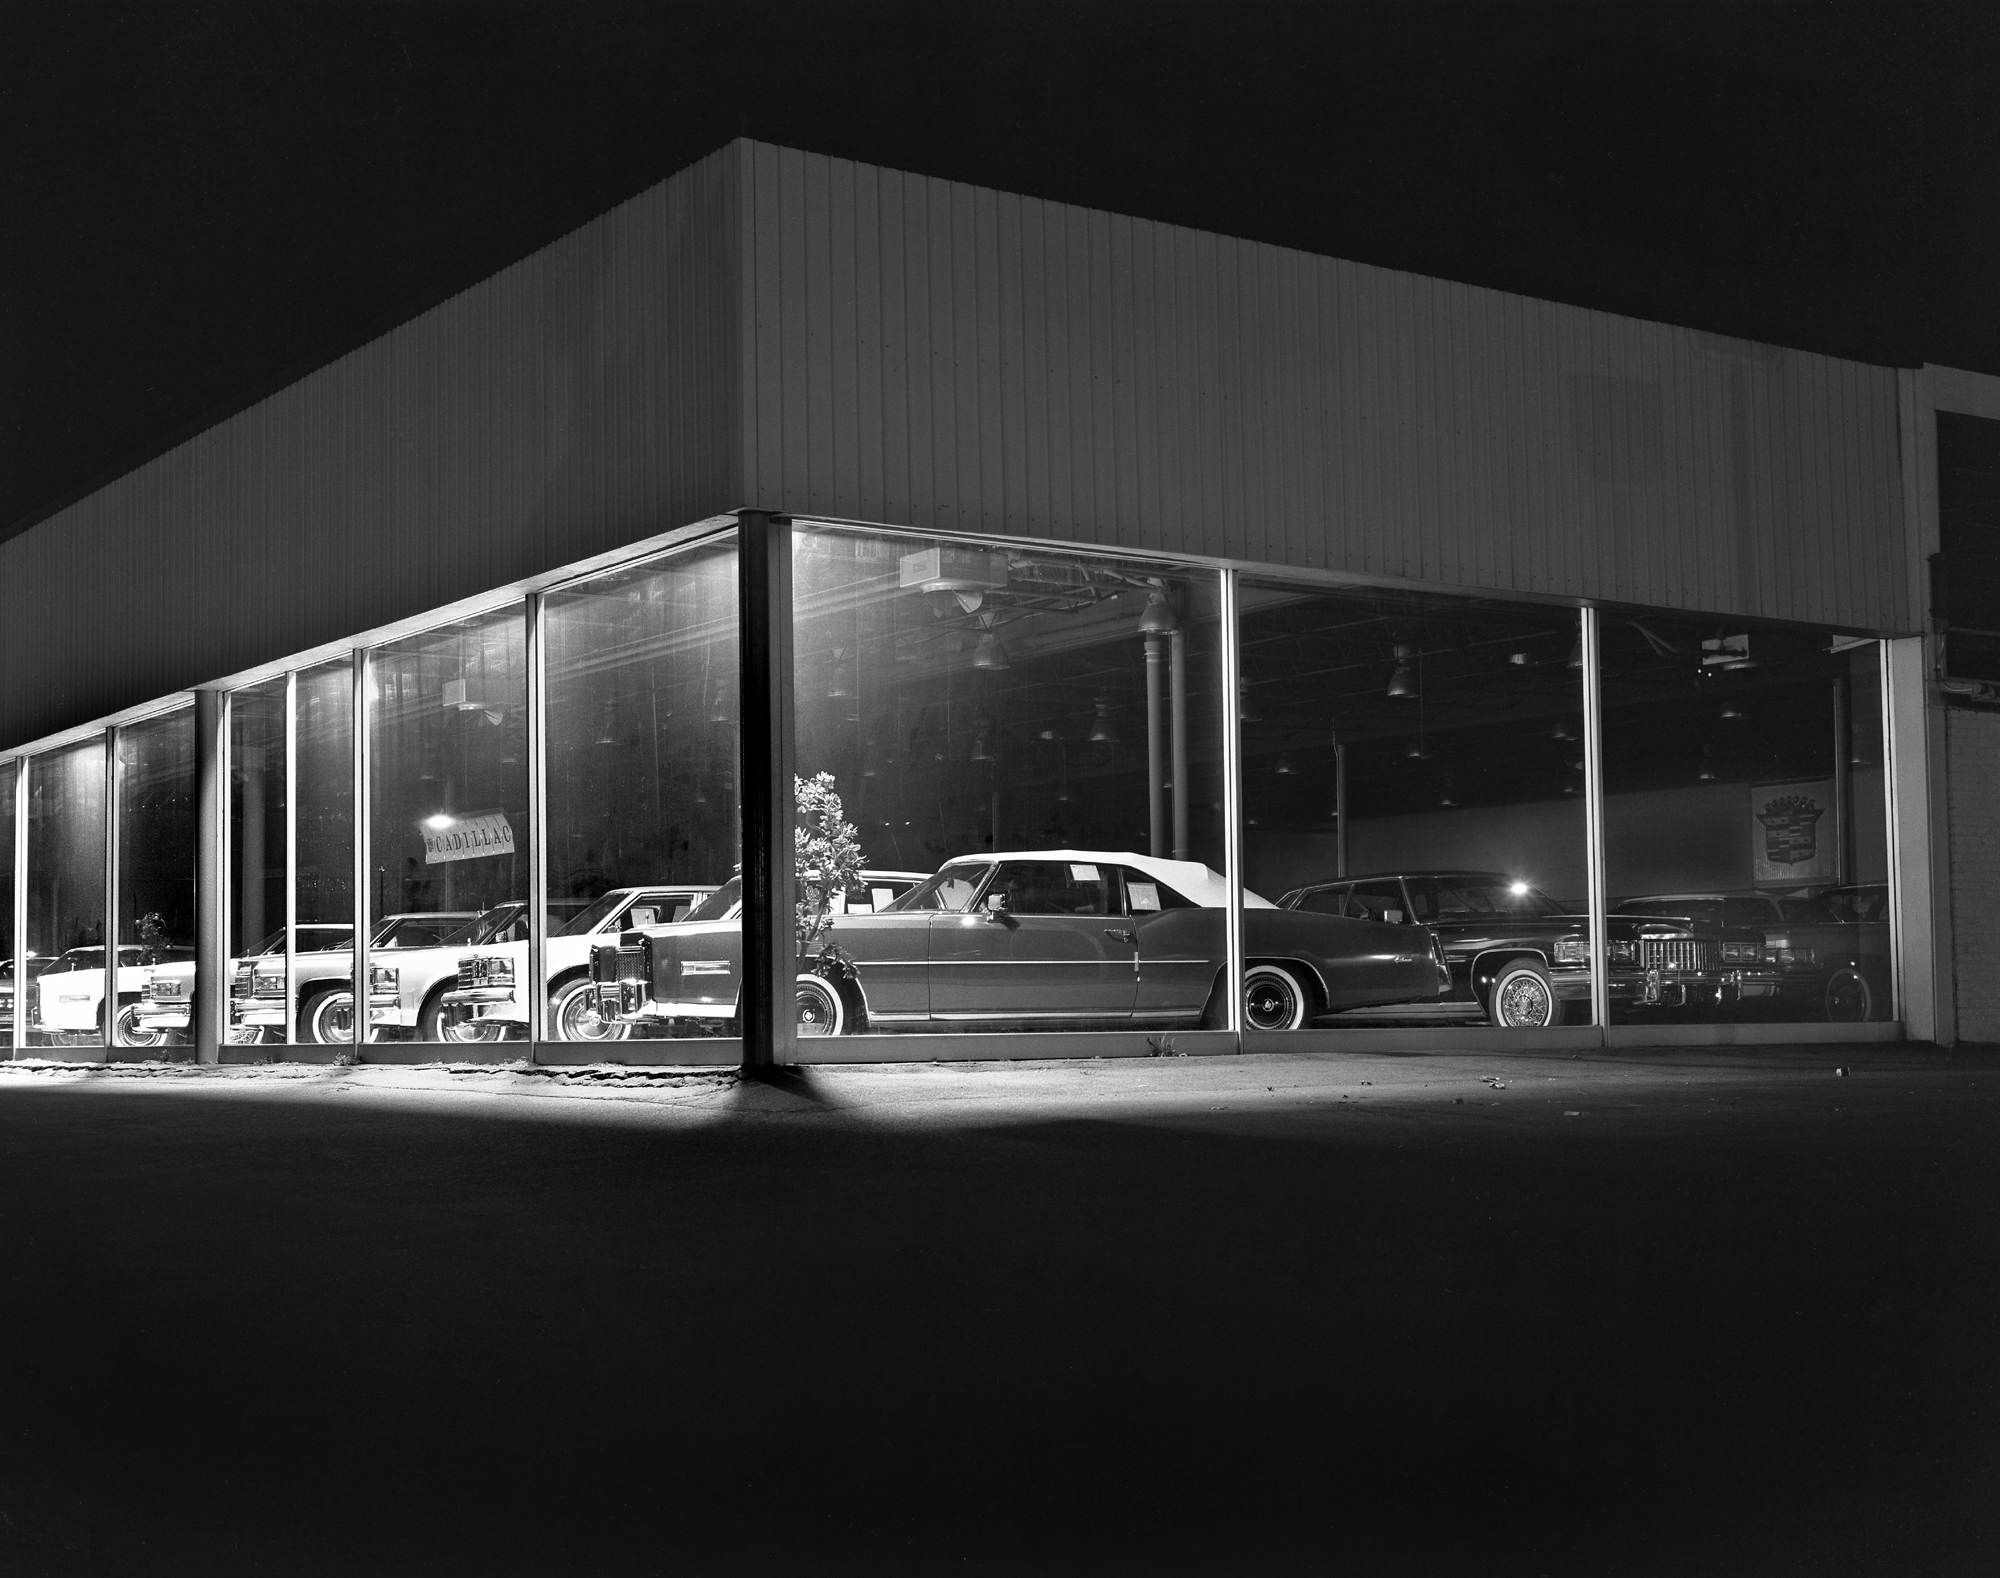 Patkin Cadillac, Mystic Valley Parkway in Medford, Mass., 1977. A dealership with many land yachts for sale. Long gone; the owner passed away a few months ago. The windows were always lit up, and the cars looked great. View full size.
